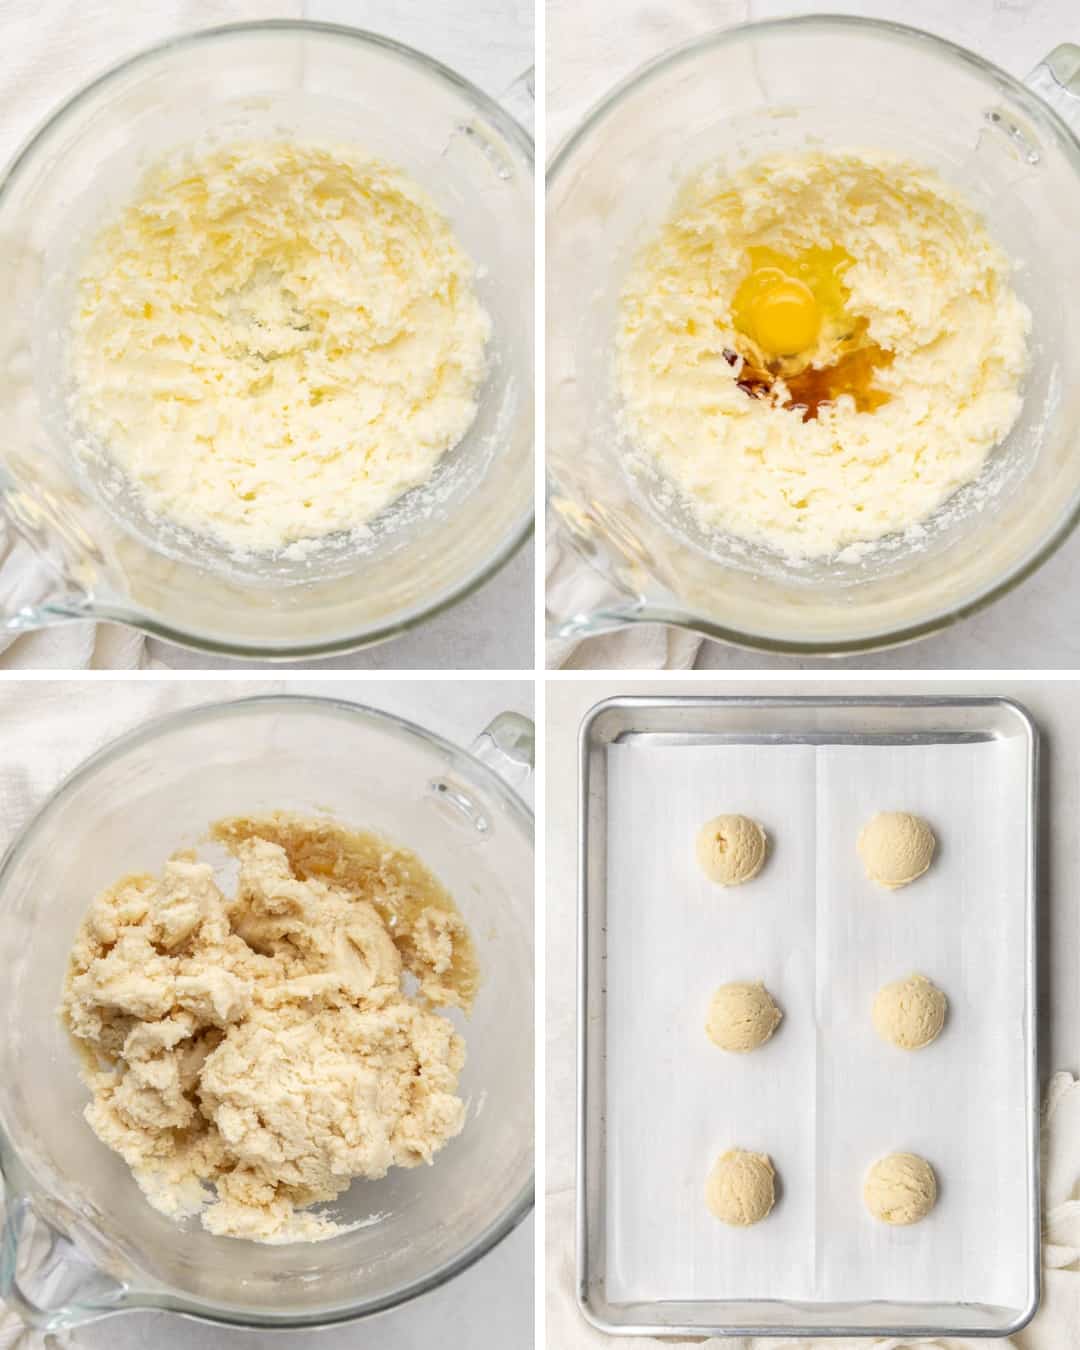 Edit download image gallery to show how to make sugar cookies at a glance.